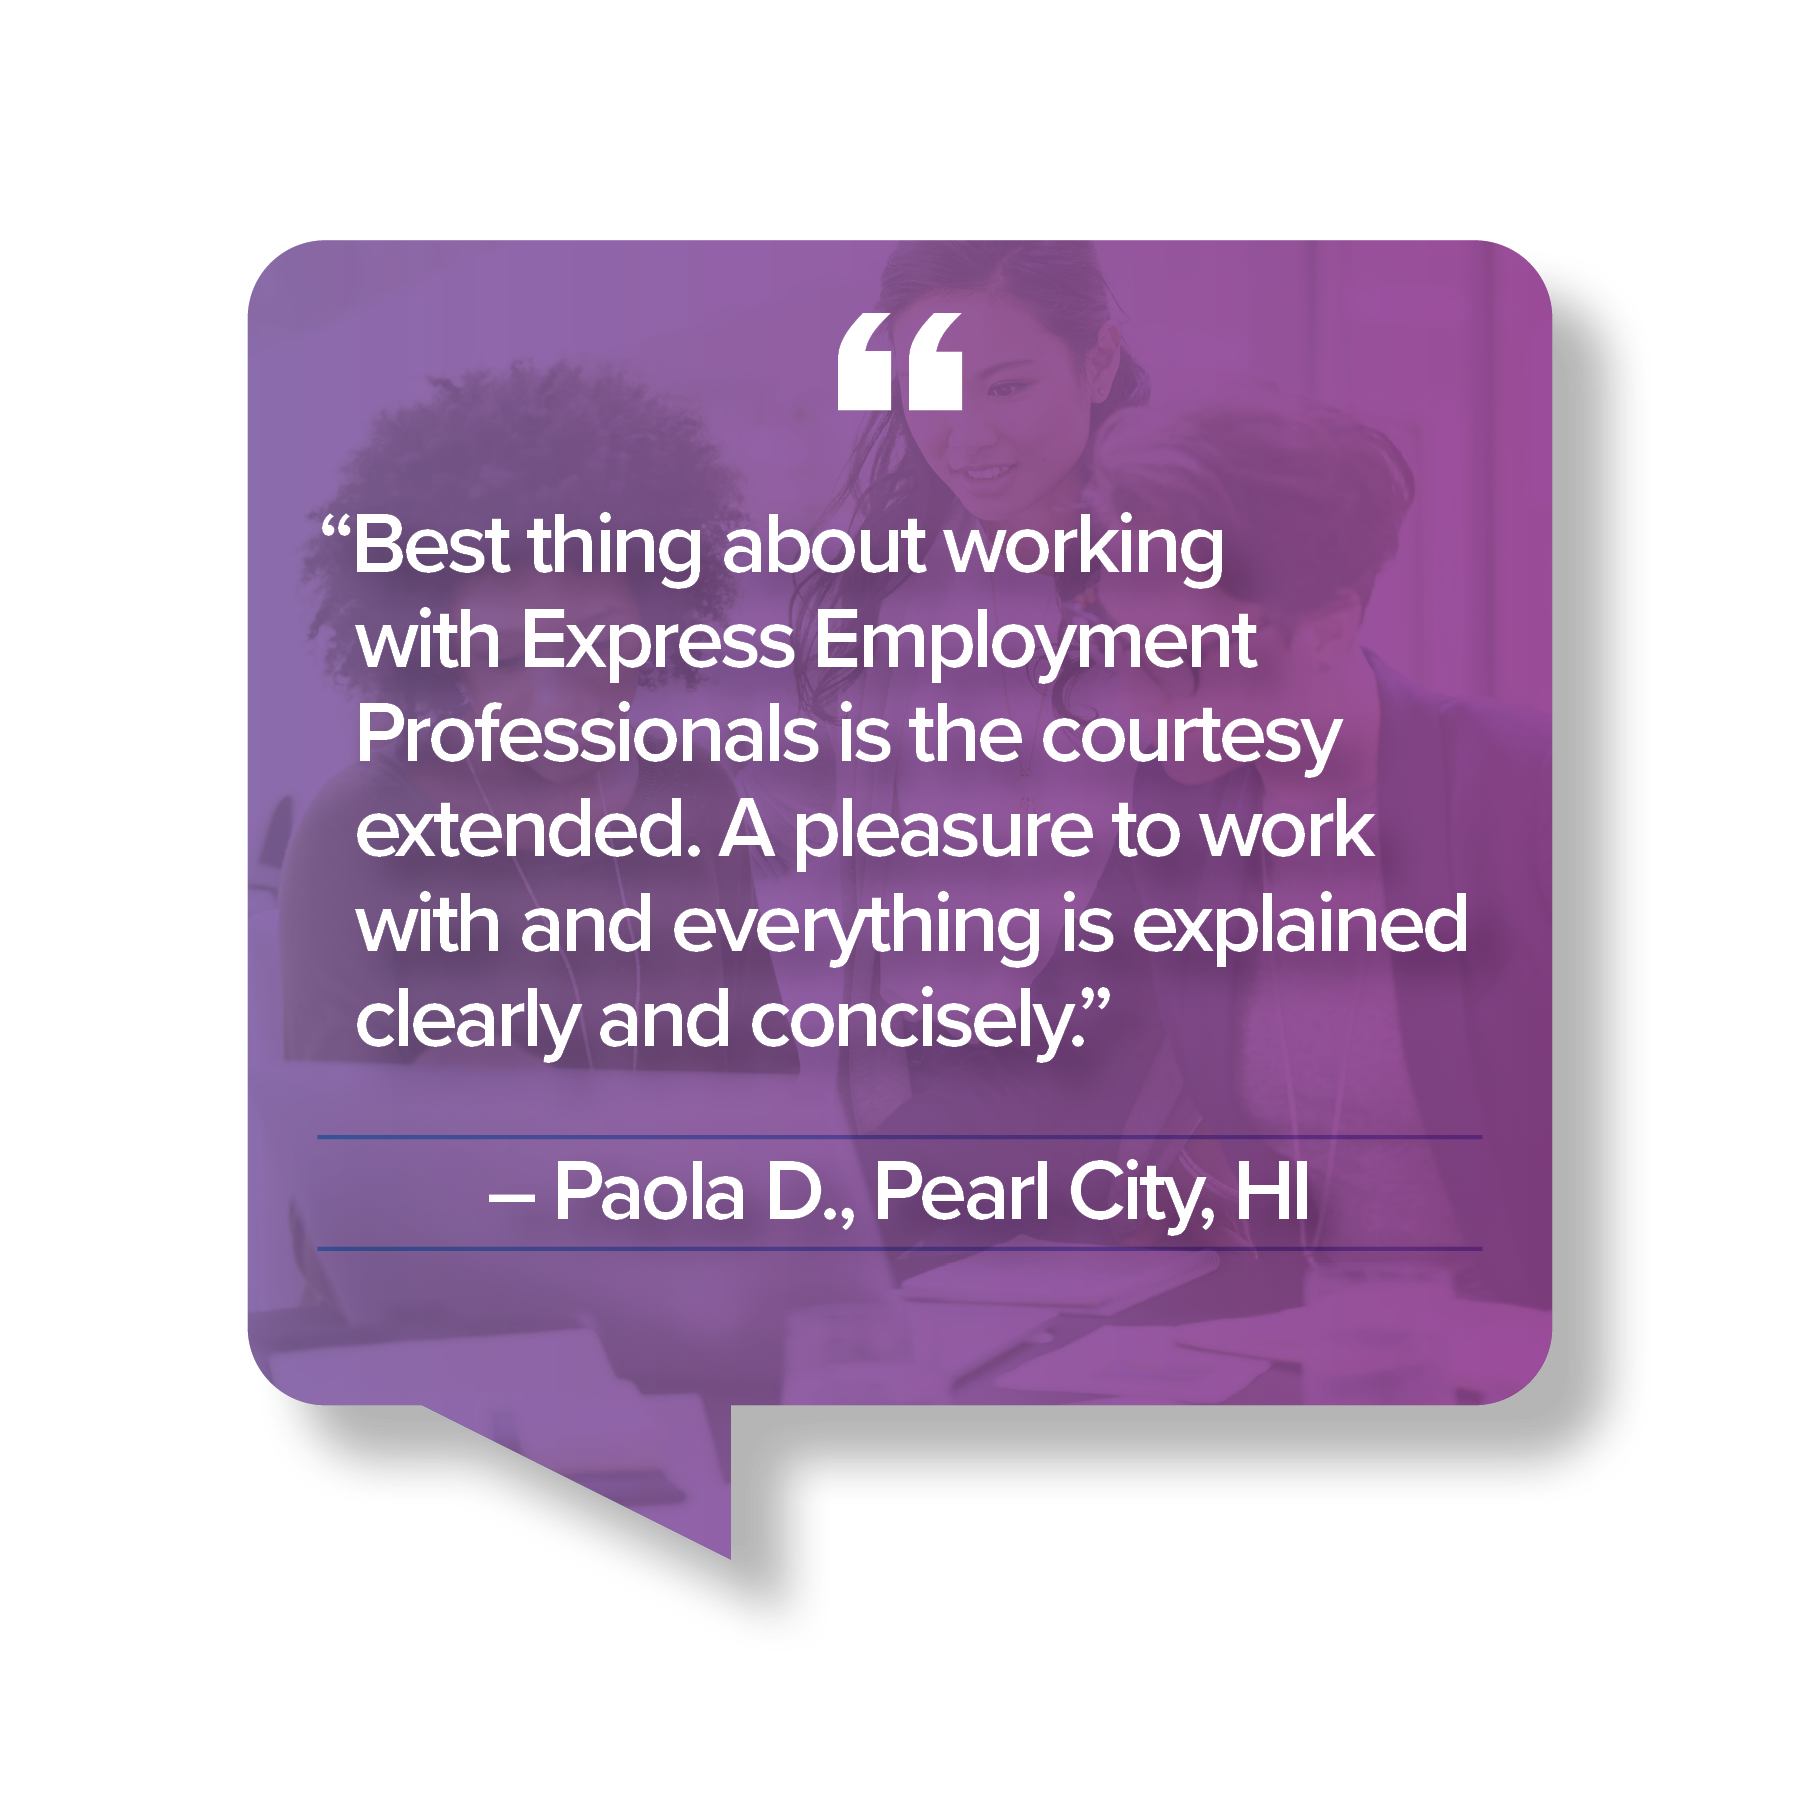 Express-Experience-Quote-3-Paola_D